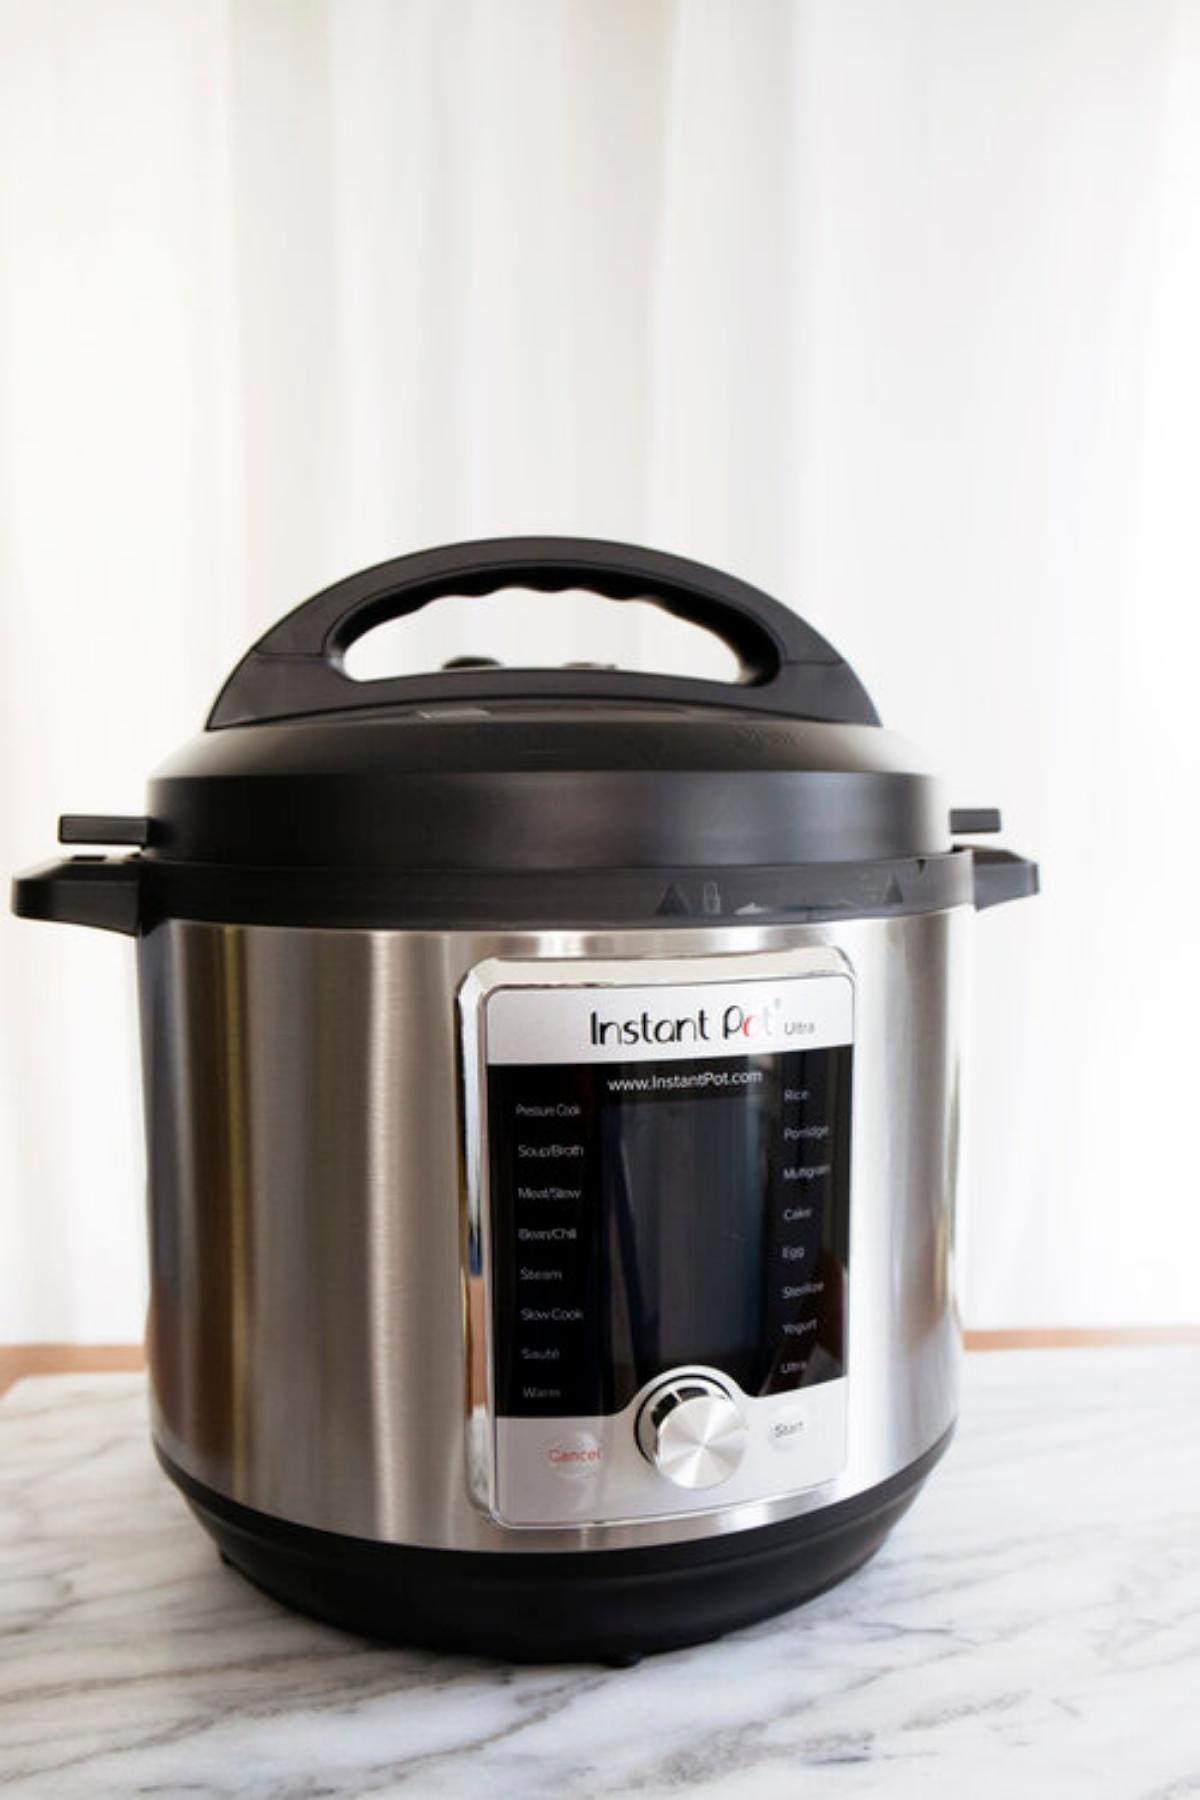 Instant pot sitting on a counter top.